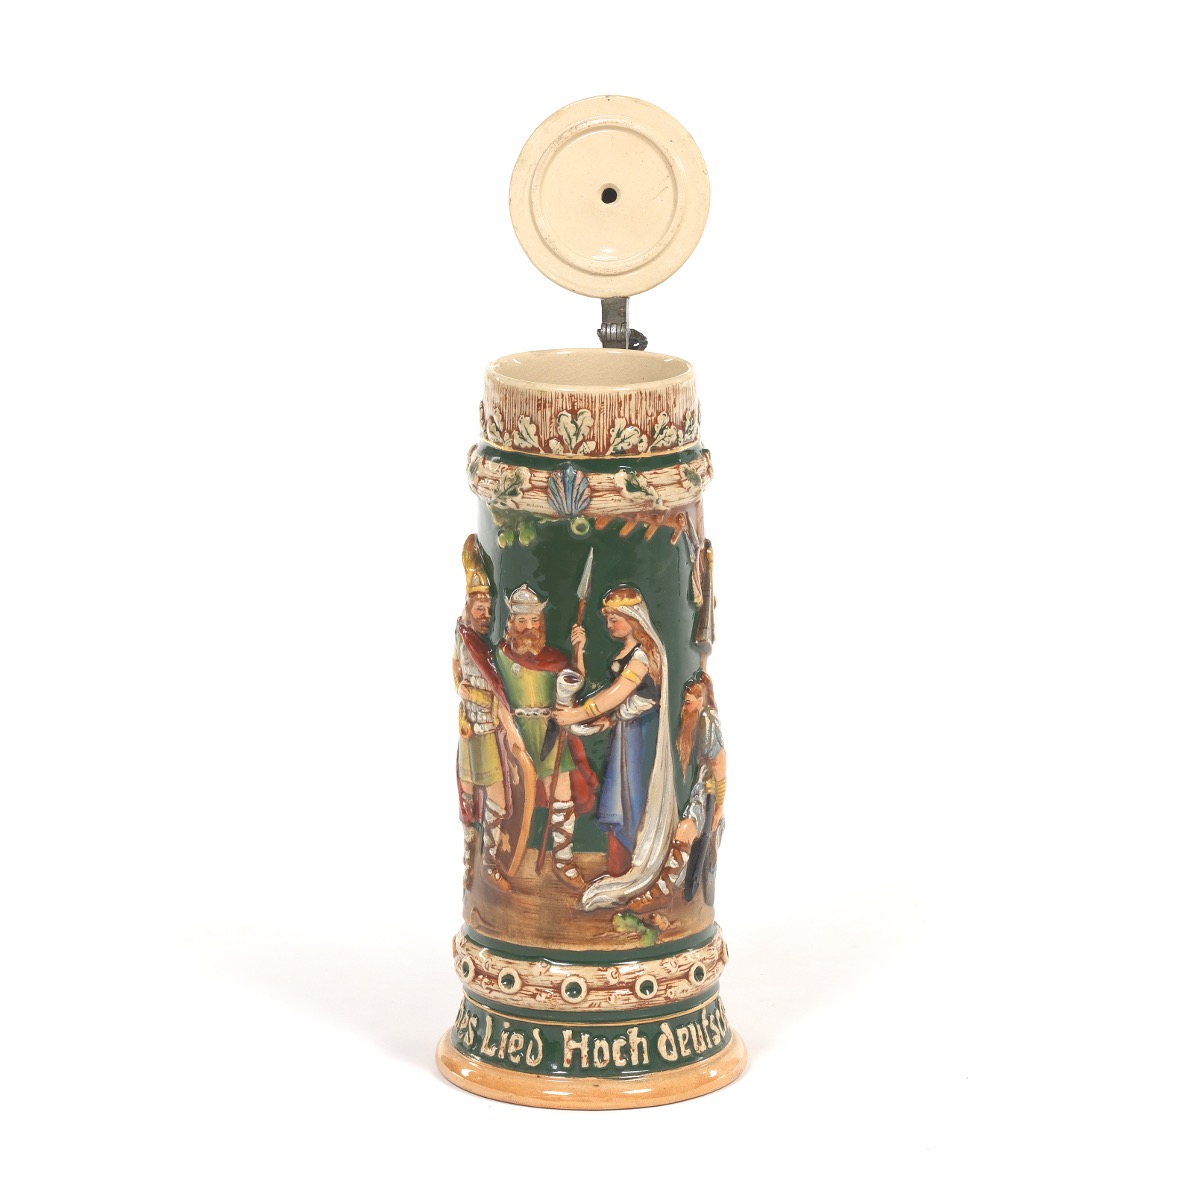 German Ceramic Stein "The Ring of the Nibelung" - Image 6 of 10